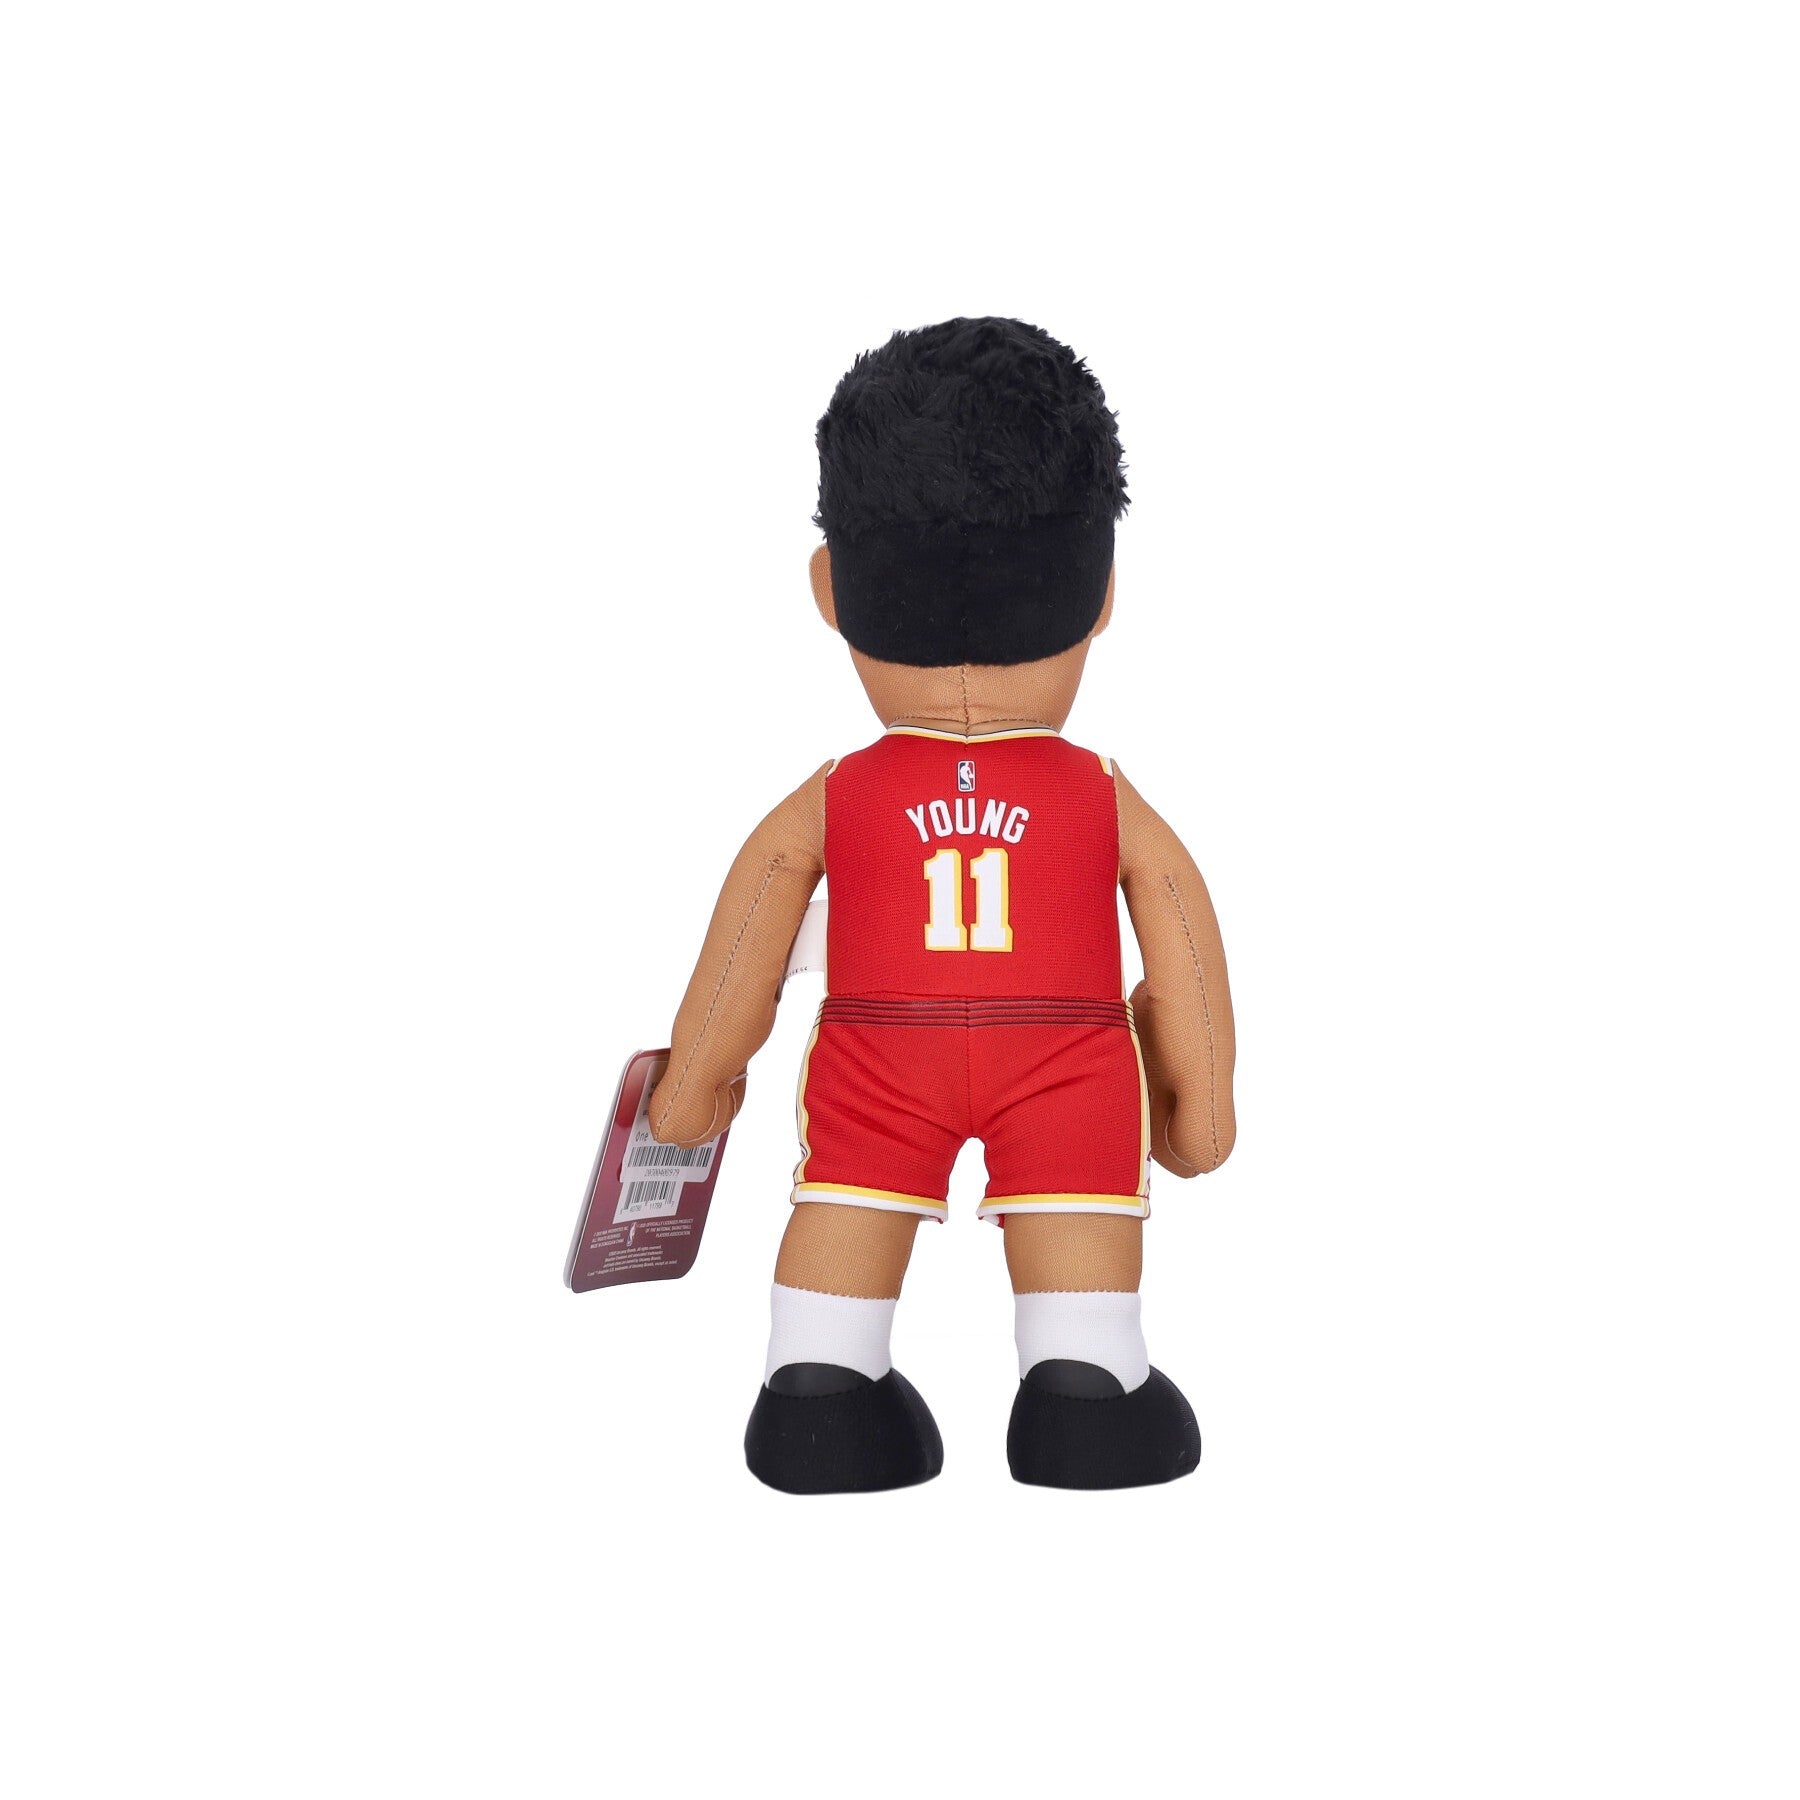 Bleacher Creatures, Pupazzetto Uomo Nba Plush No 11 Trae Young Atlhaw, 